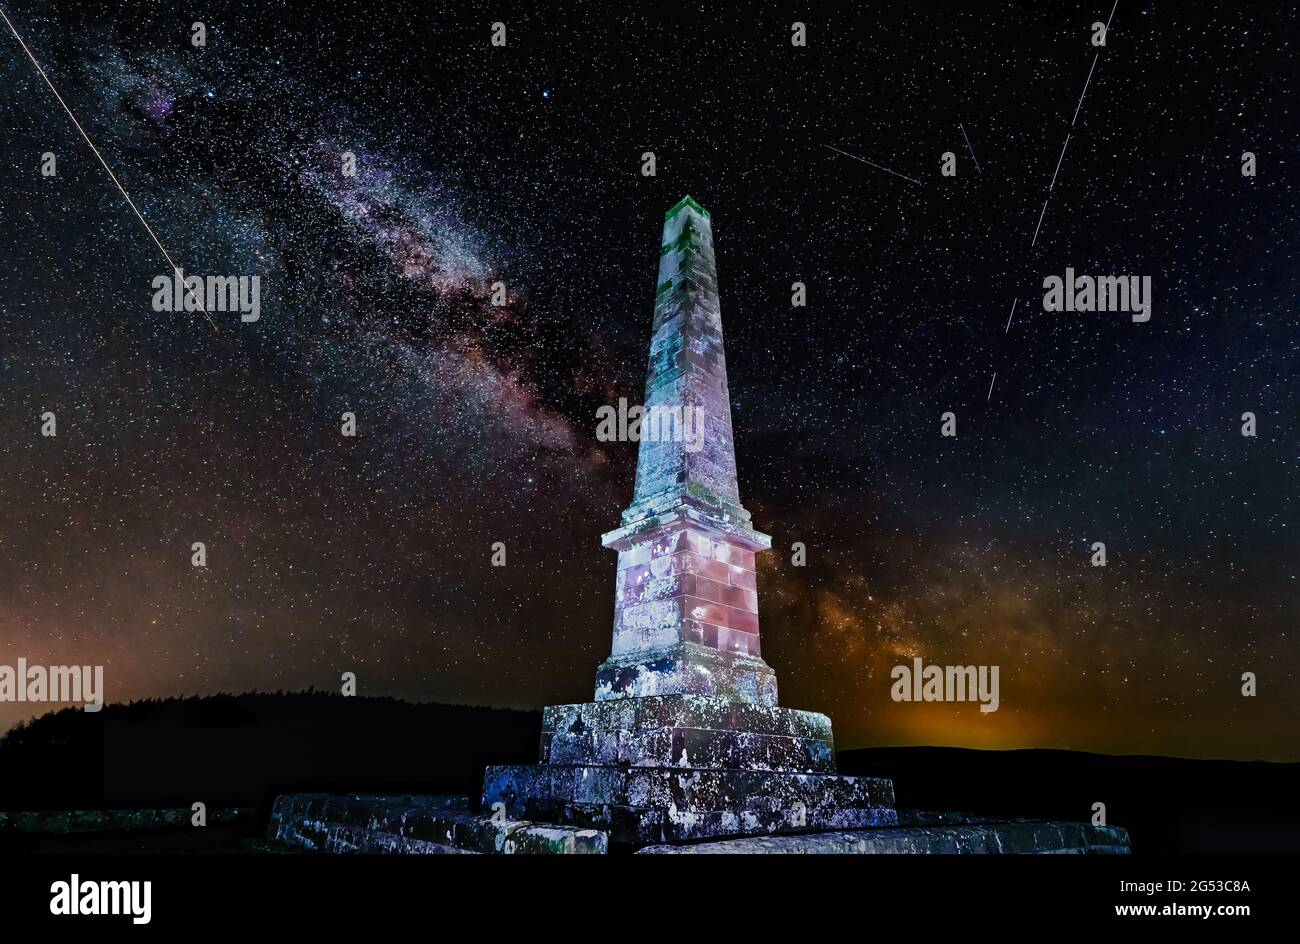 Balfour obelisk monument it up at night with Milky Way stars in the night sky and a shooting meteor, East Lothian, Scotland, UK Stock Photo